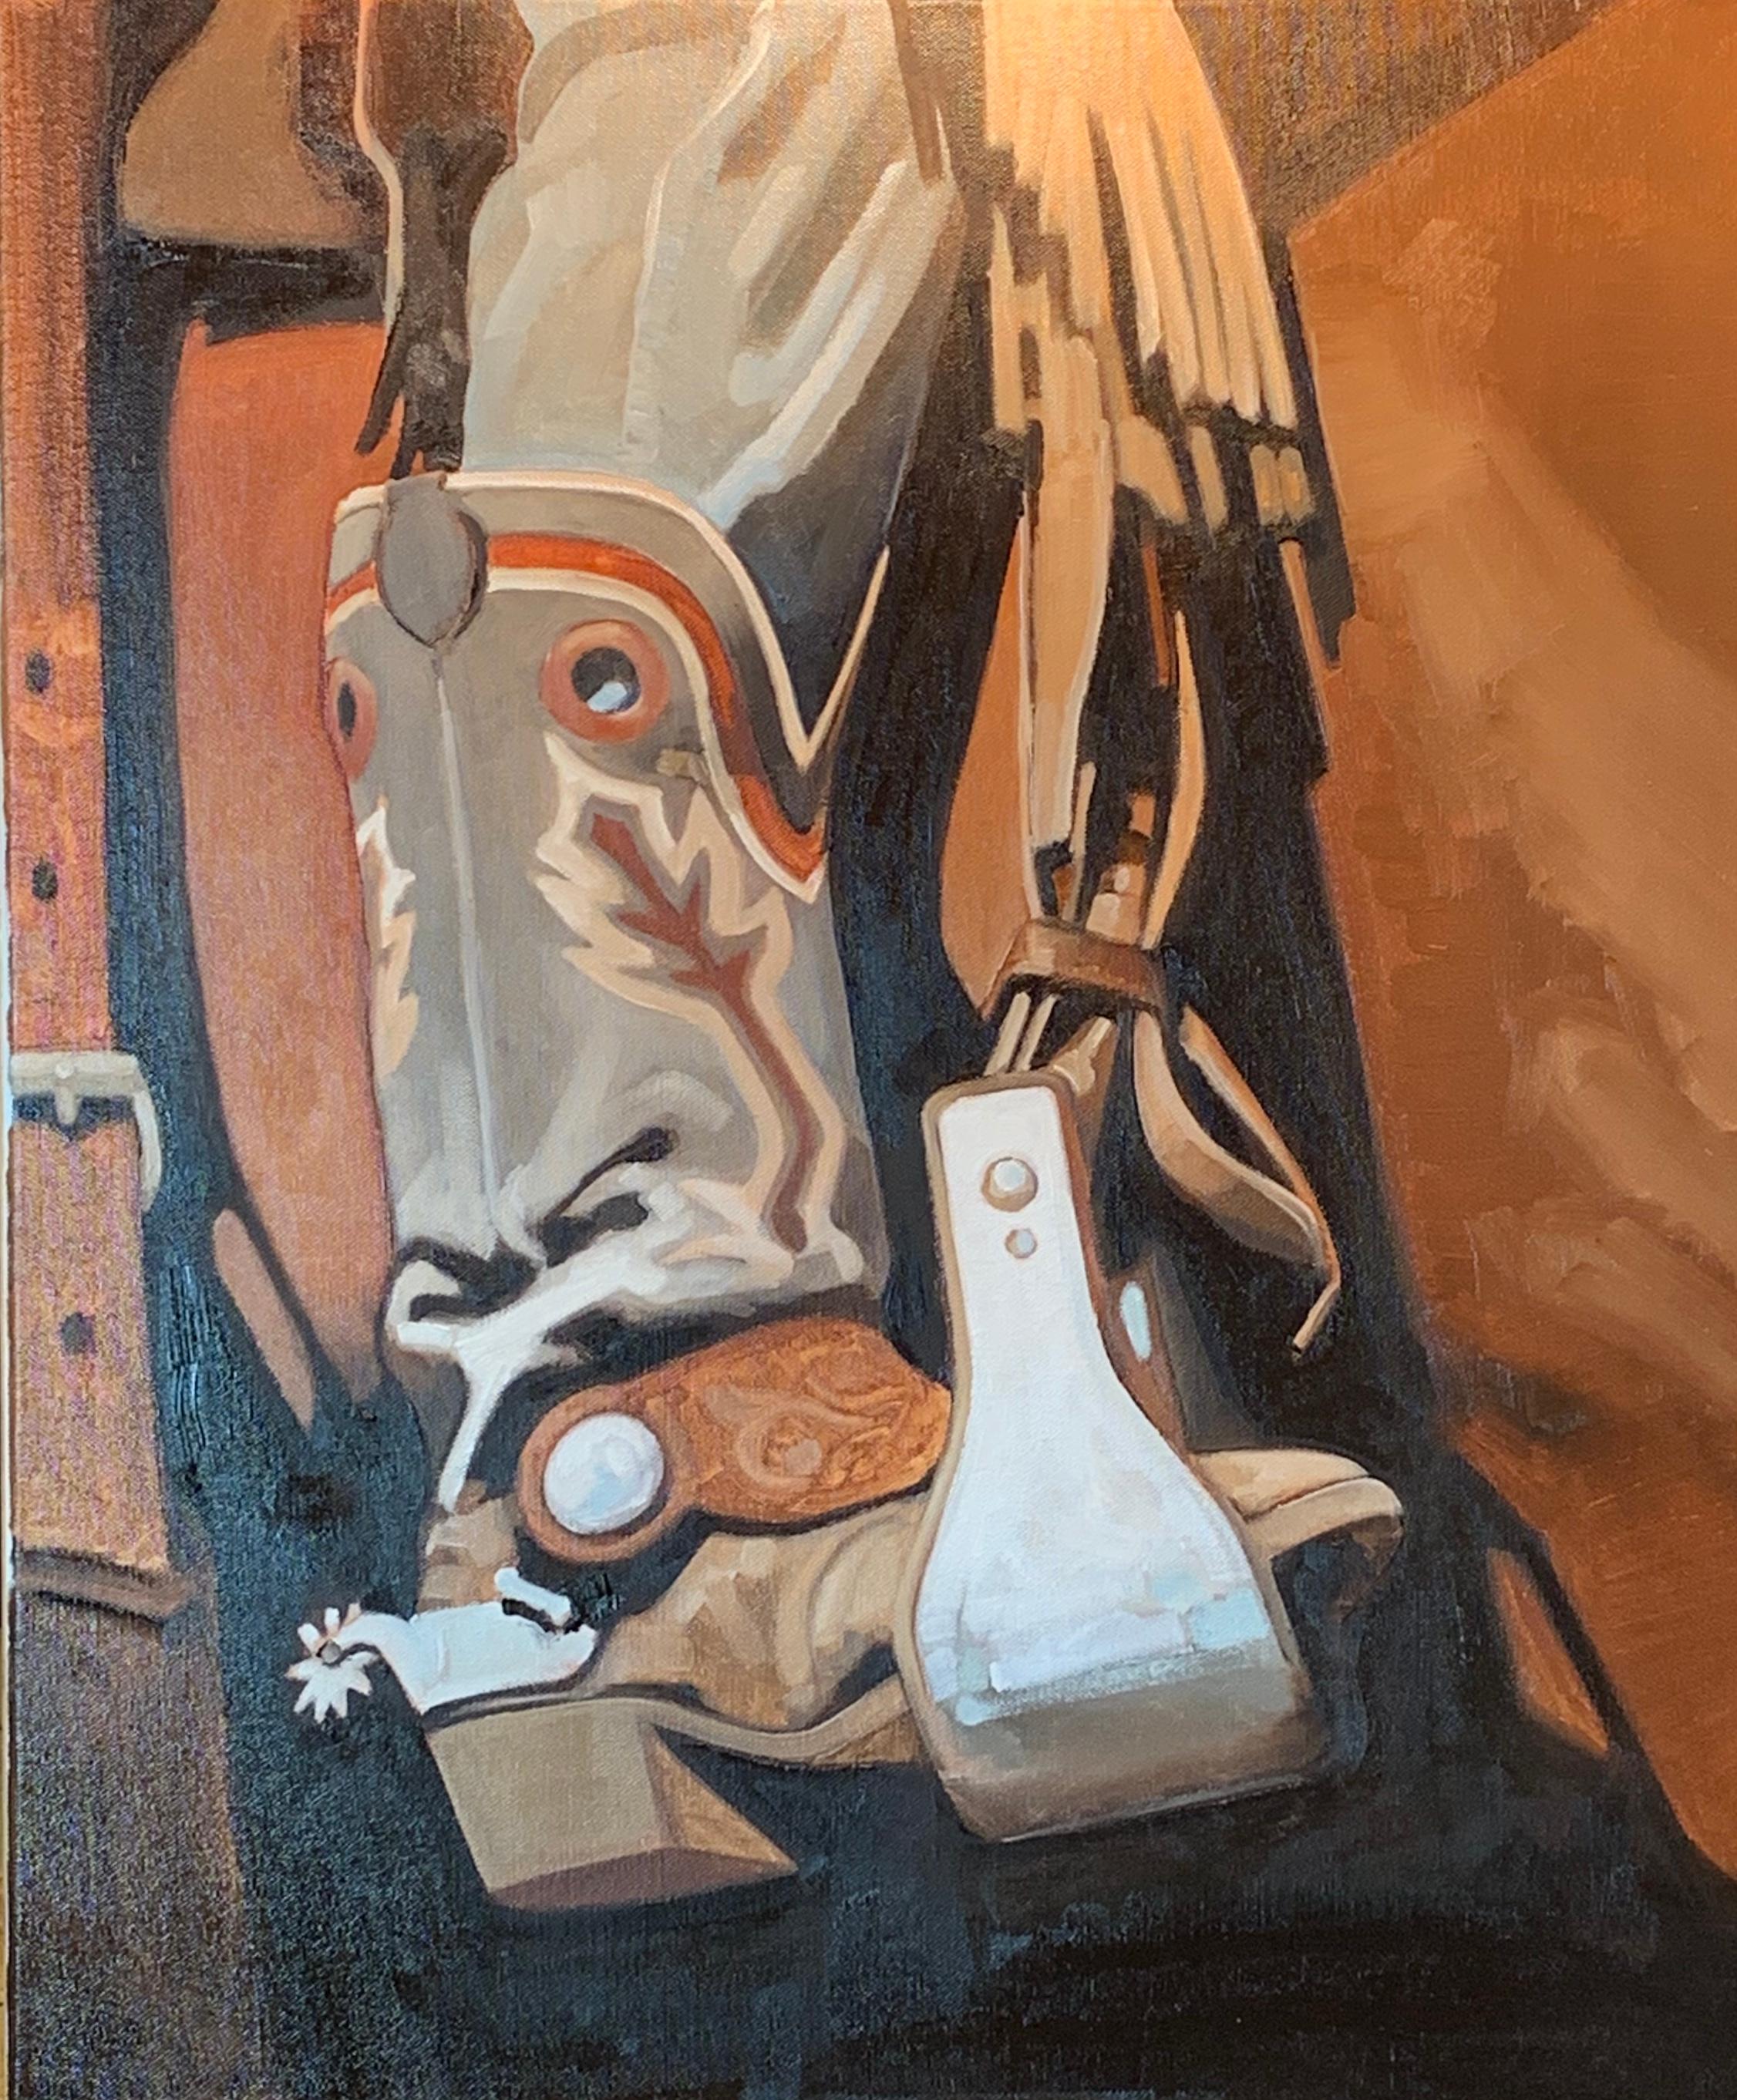 Tools of the Trade (cowboy, decorative cowboy boot, rowelled spur, browns, grey) - Painting by Peggy Judy